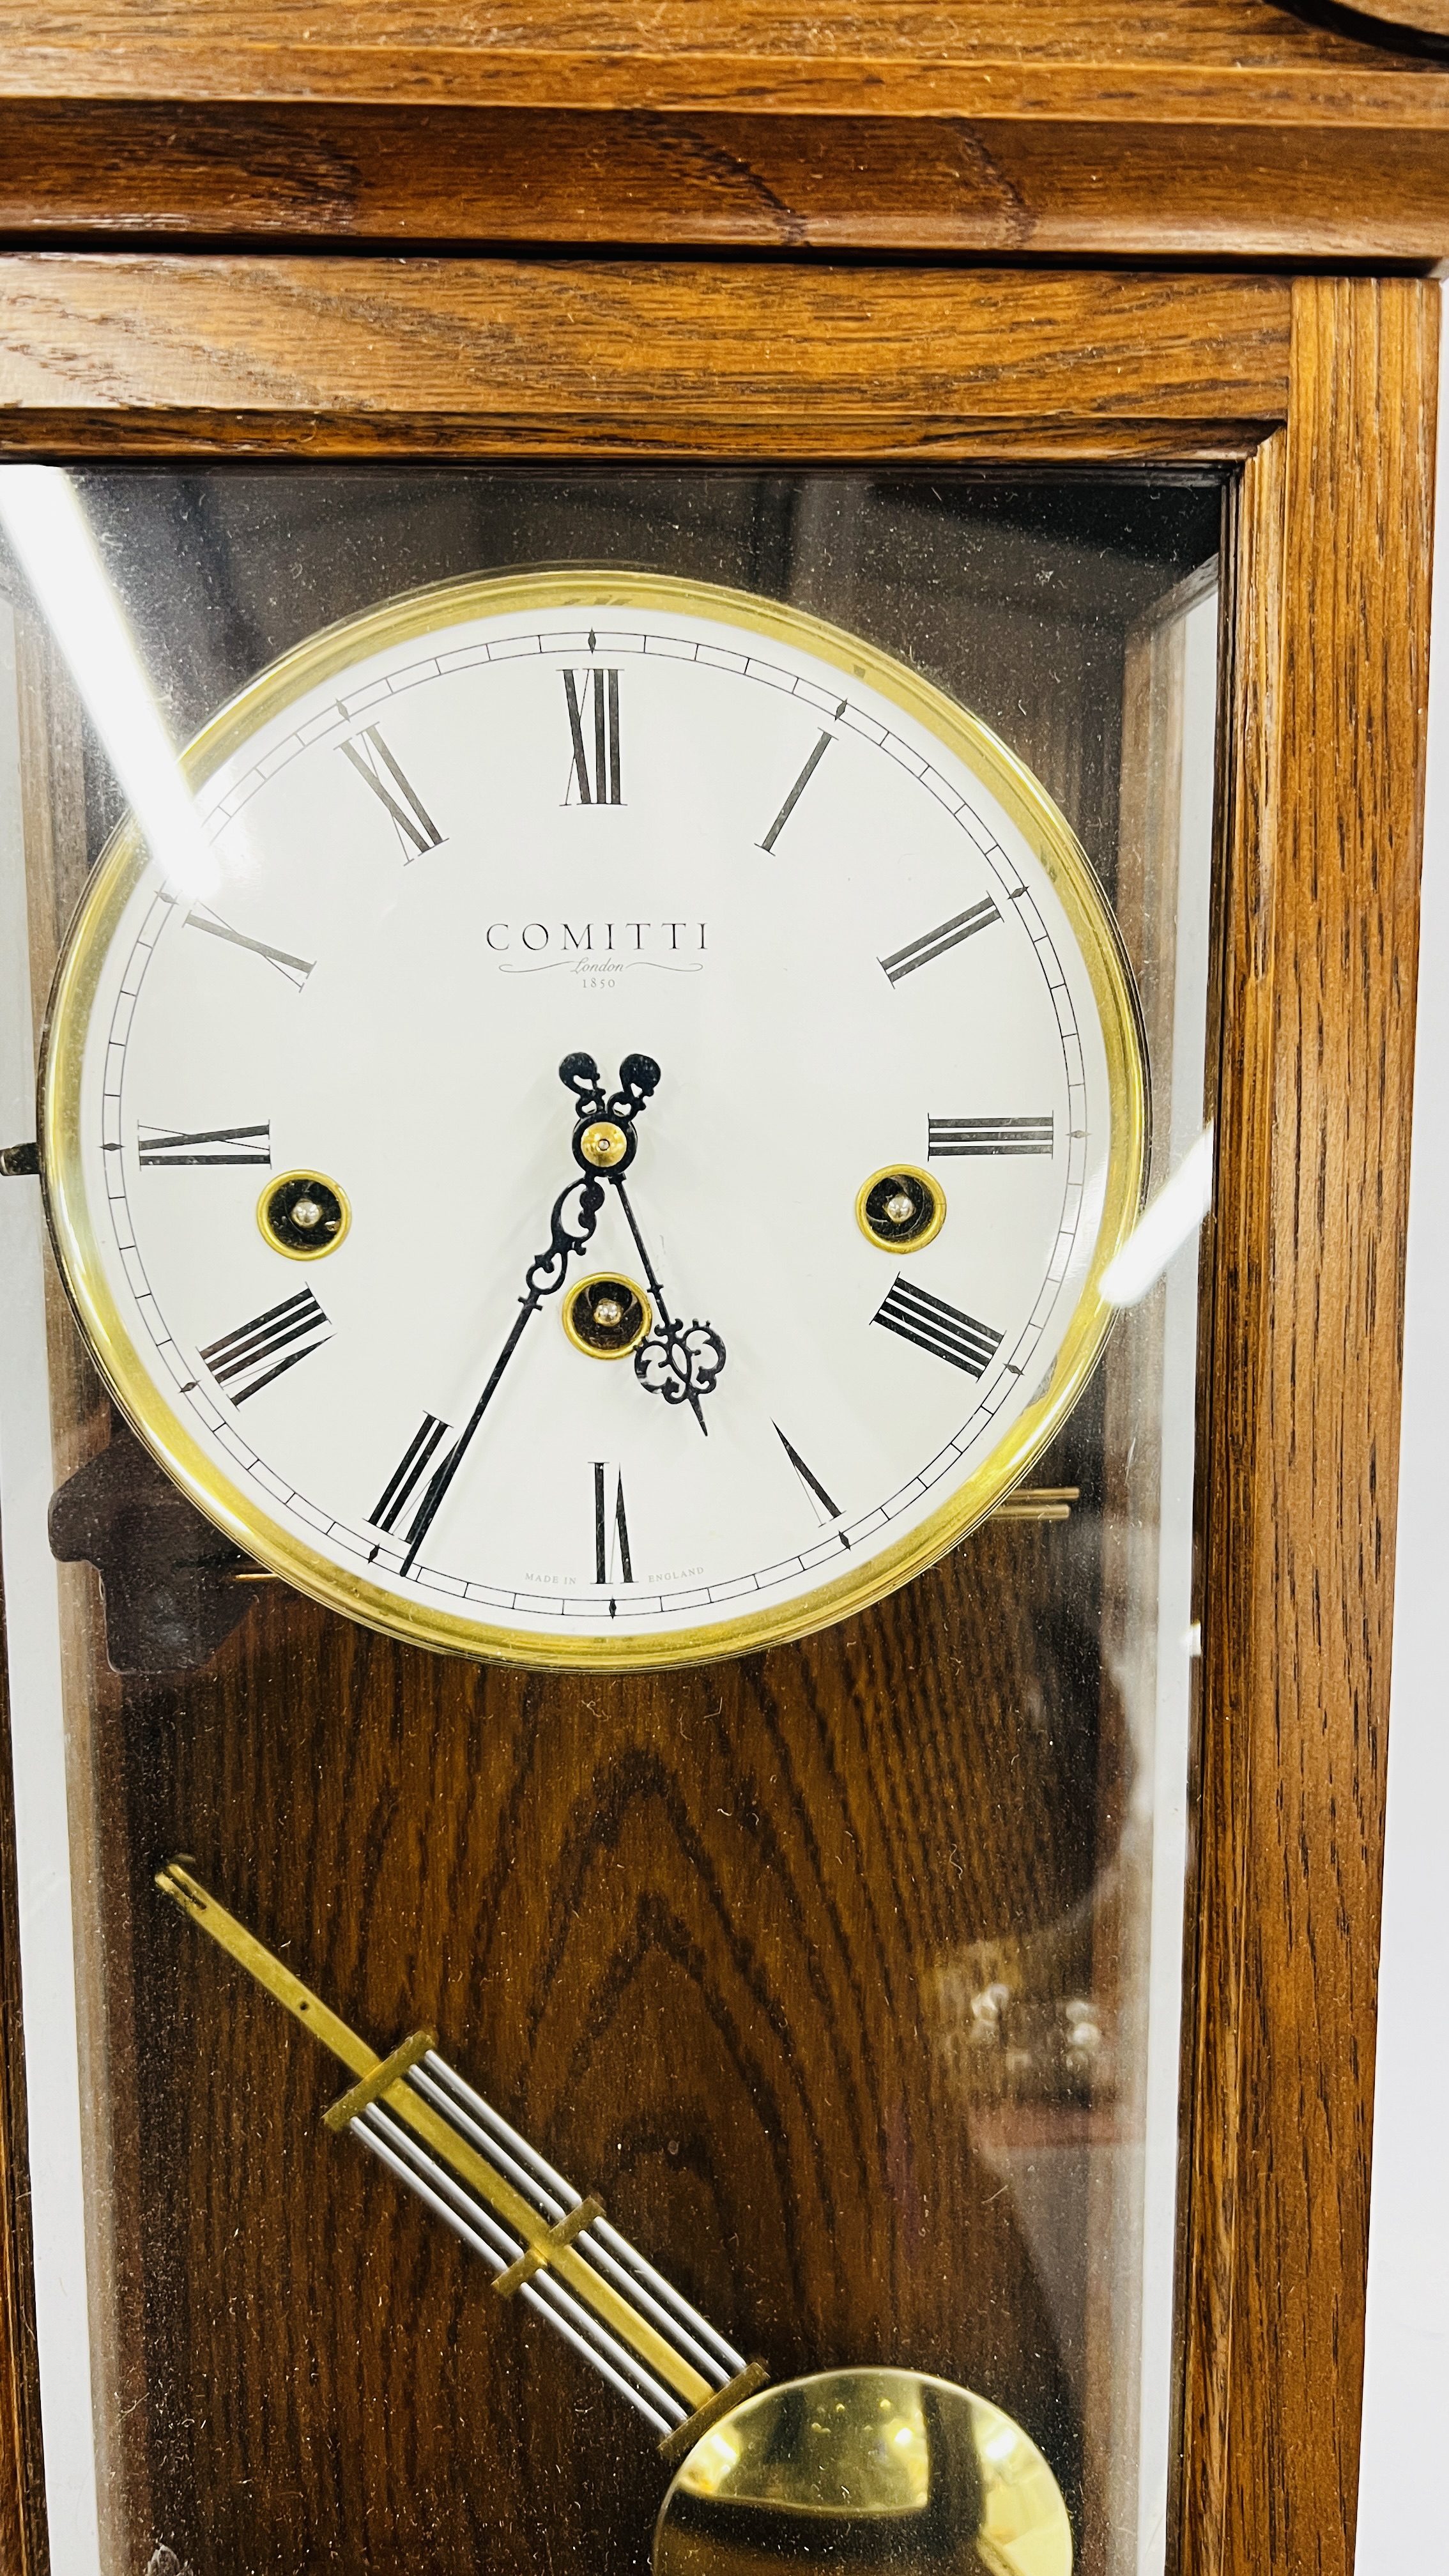 GOOD QUALITY REPRODUCTION WESTMINSTER CHIMING WALL CLOCK BY COMITTI OF LONDON, H 59CM. - Image 2 of 5